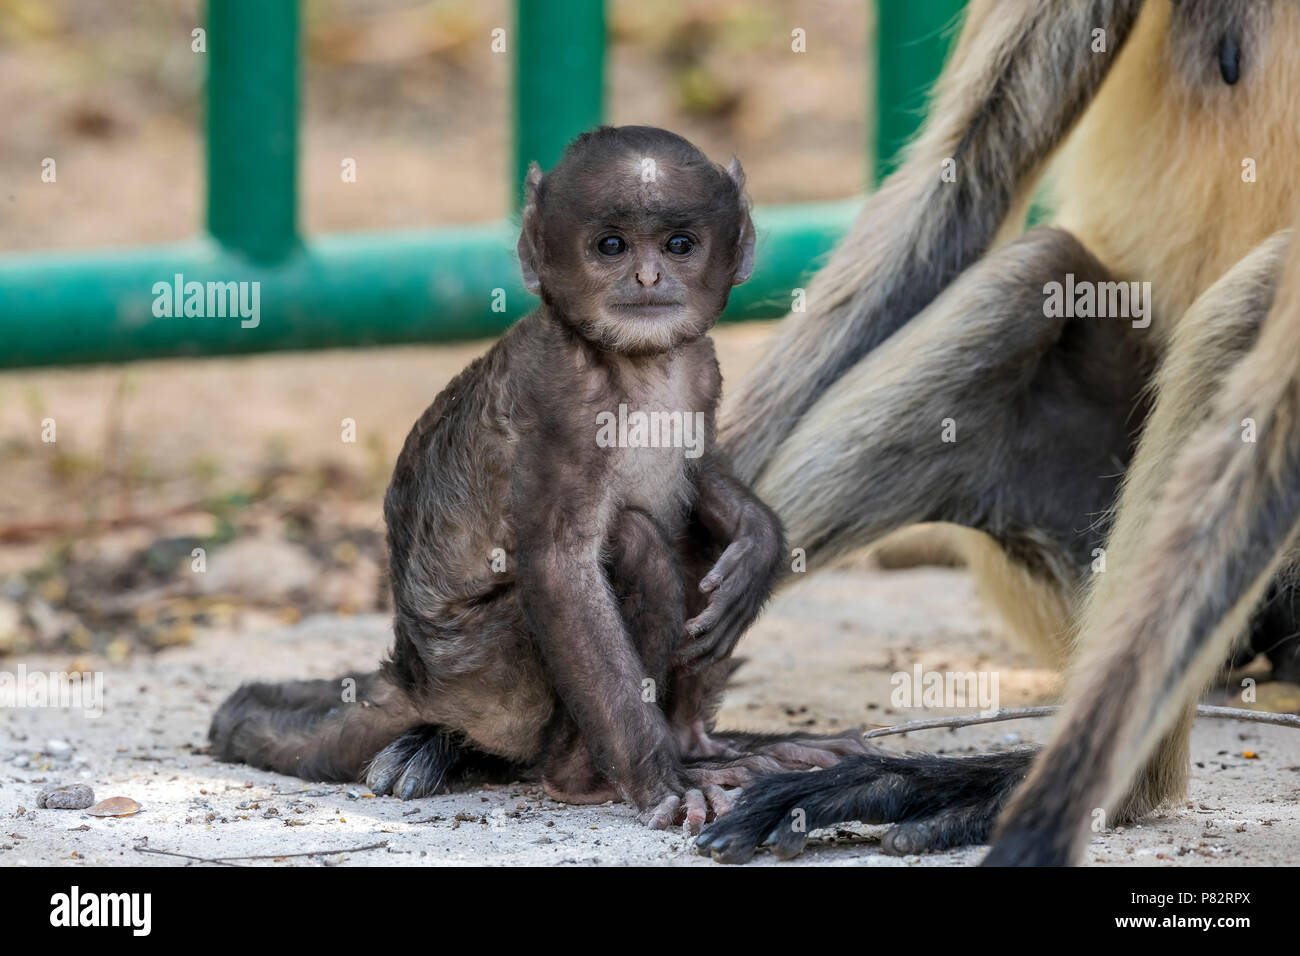 Juvenile Northern Plains Langur sitting on a track in Bandavgarh NP, India. March 2017. Stock Photo